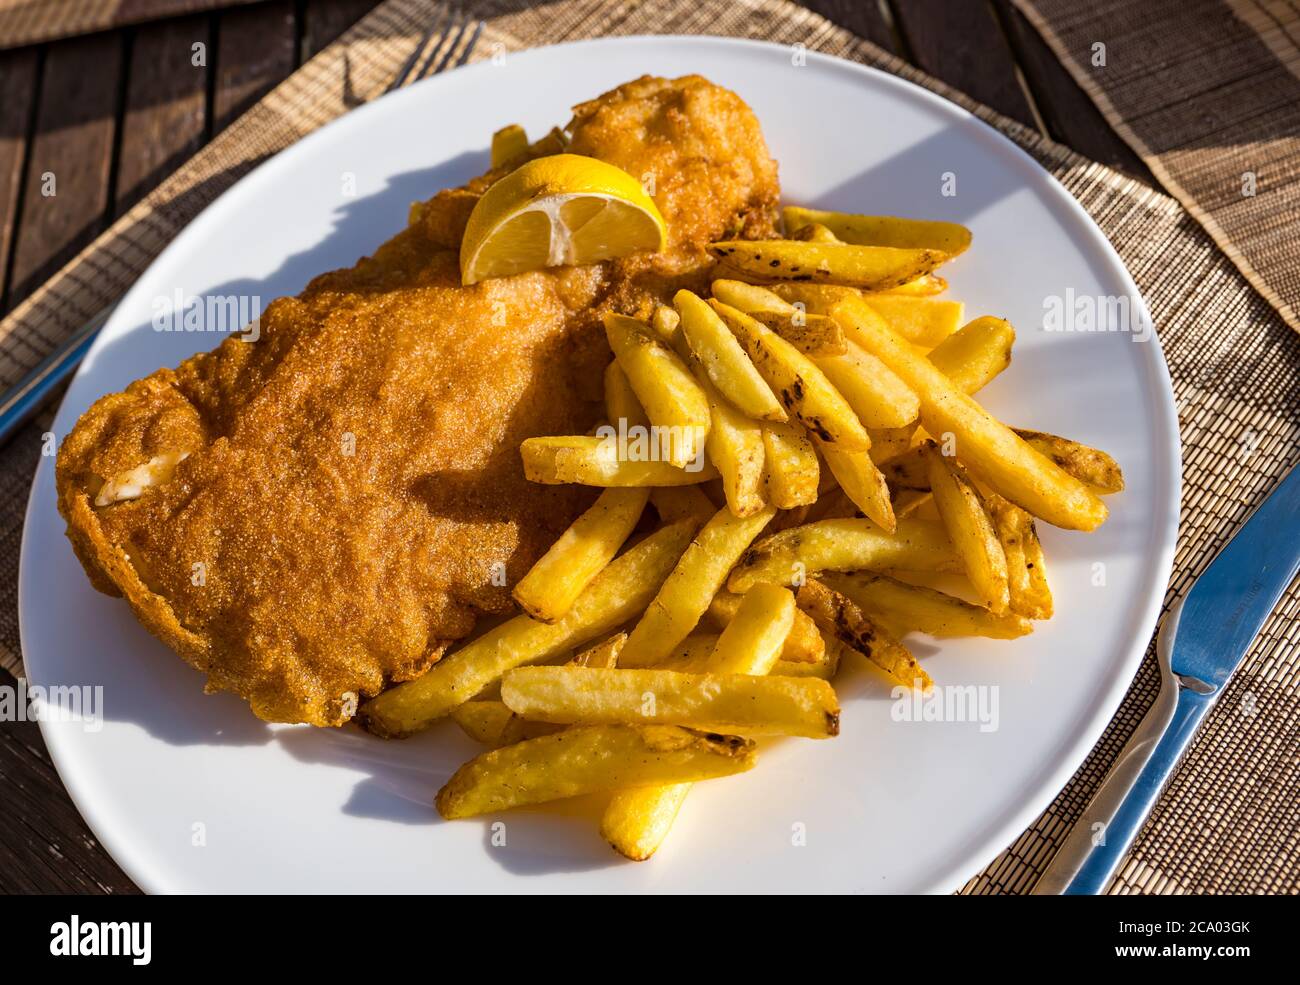 Haddock fish and chips or fish supper on plate in Summer sunshine with lemon, Scotland, UK Stock Photo